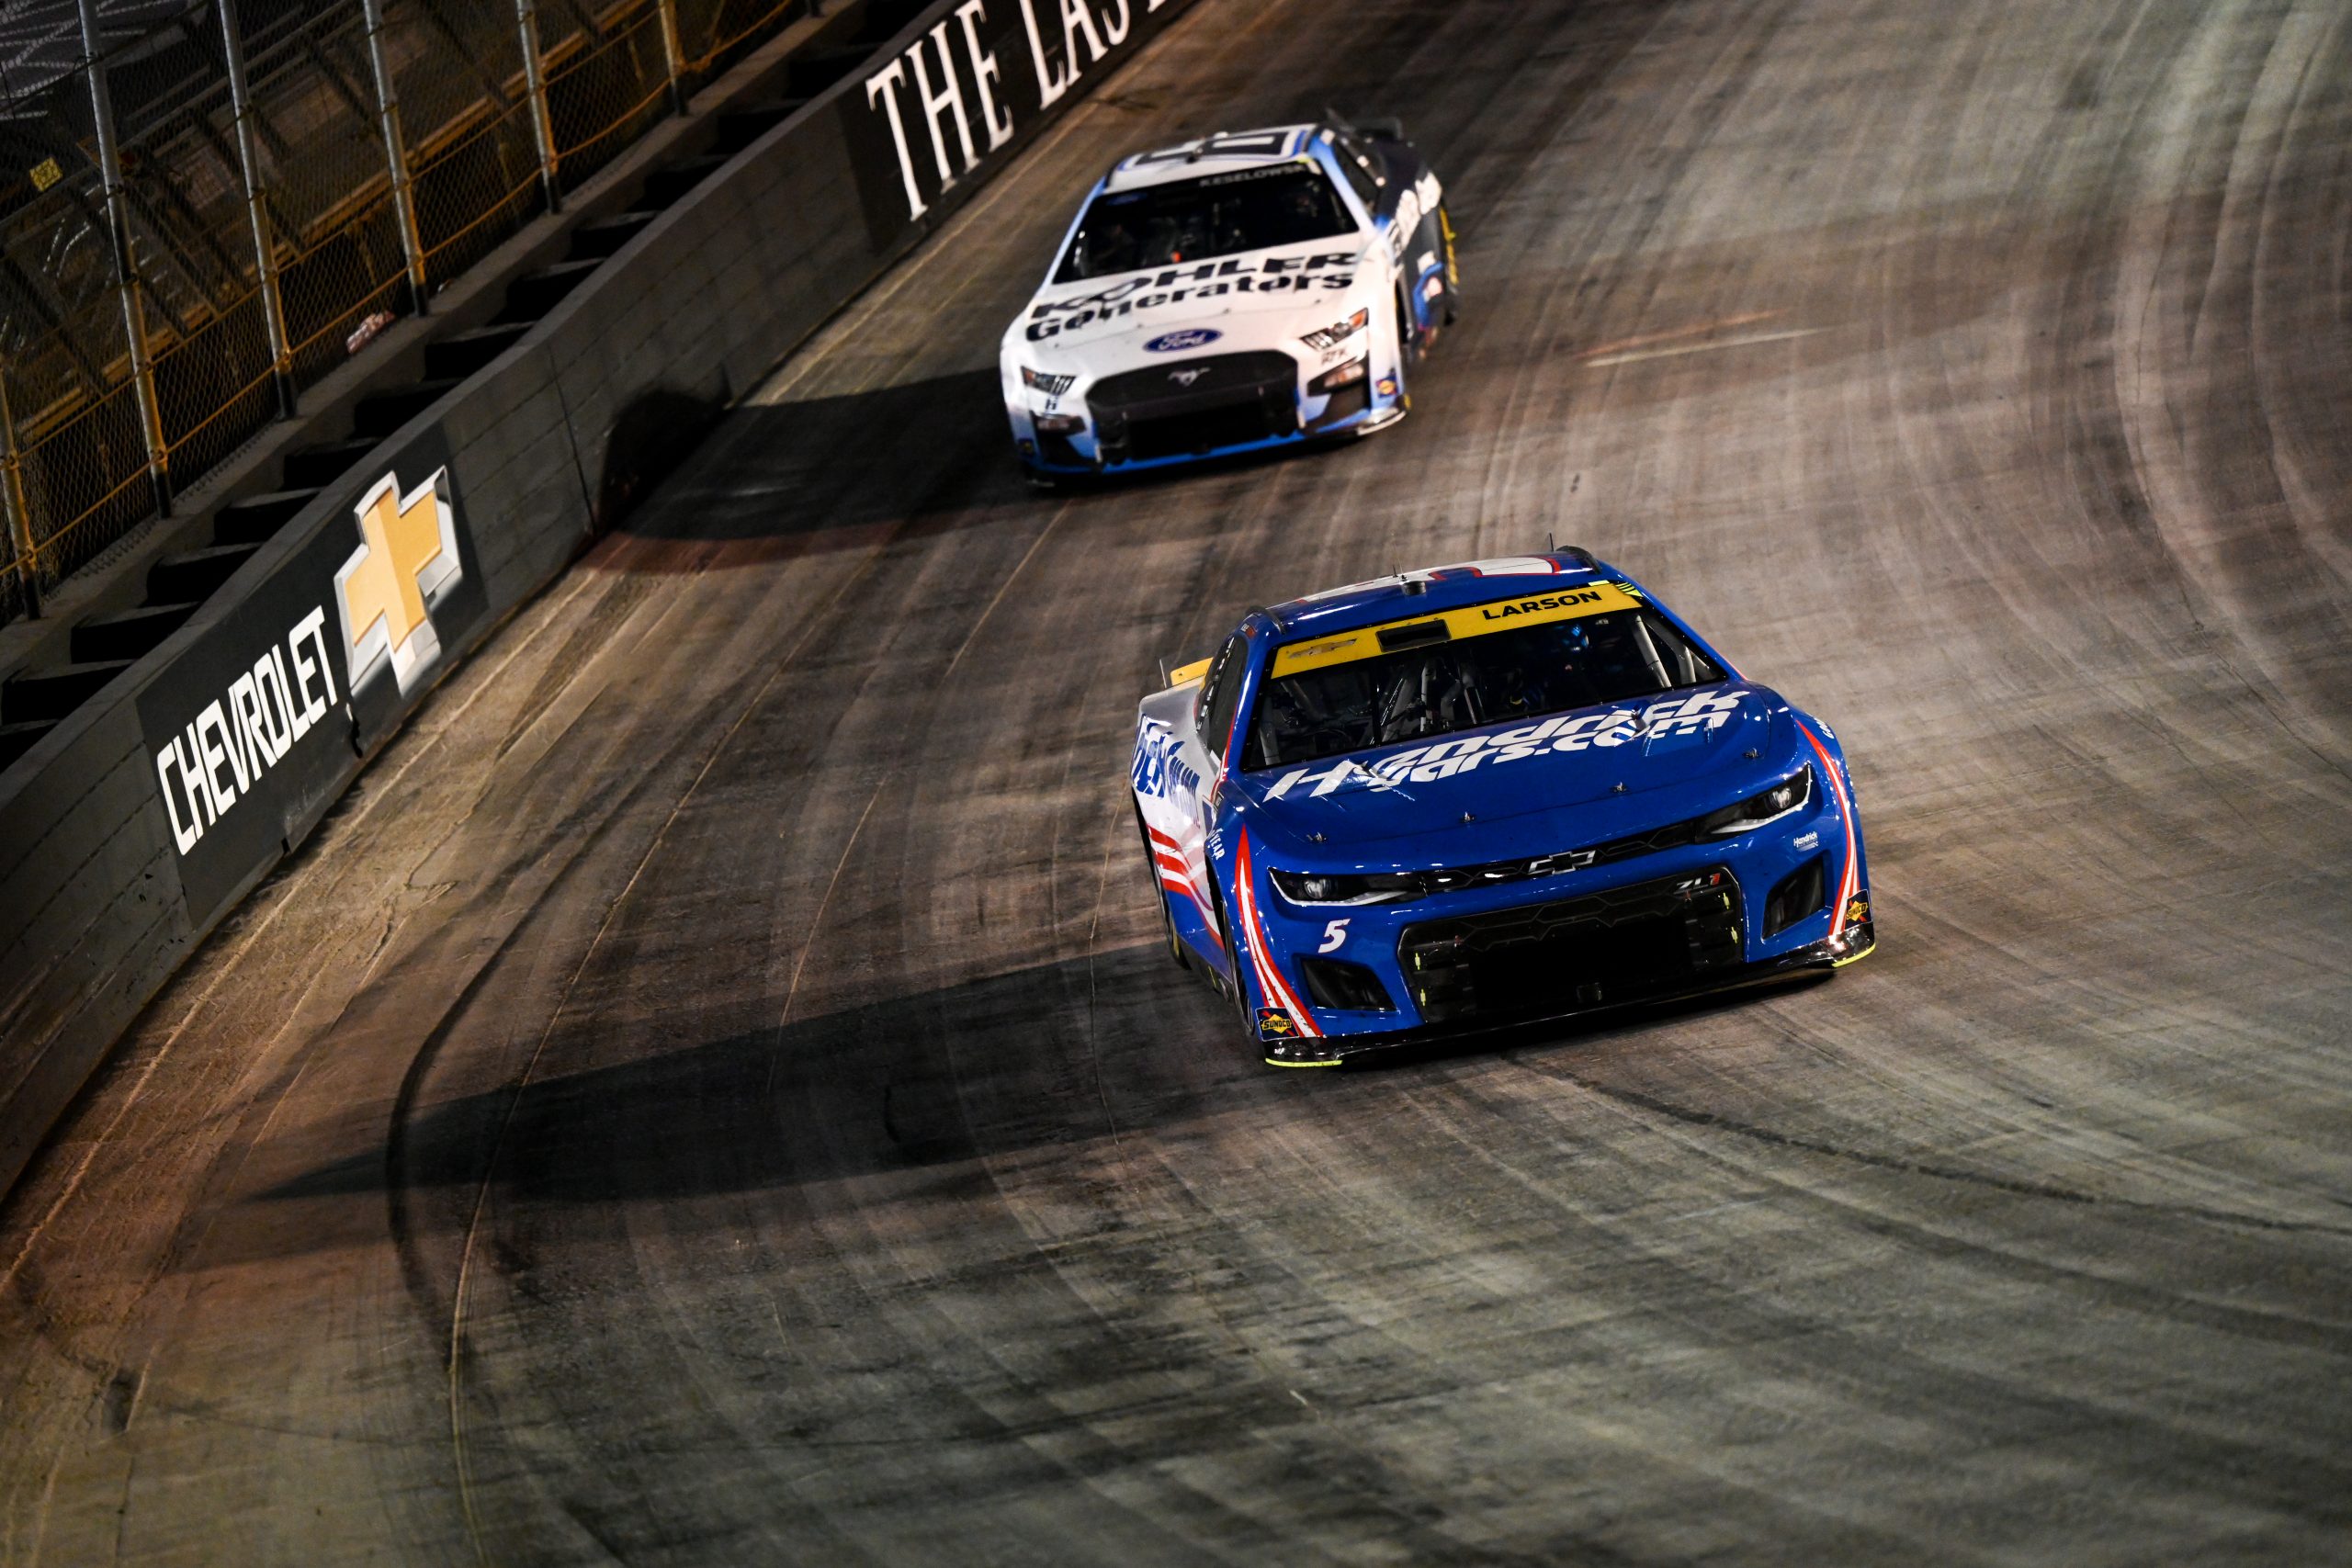 Larson and Brad Keselowski played cat and mouse for the lead during the latter portions of Stage 3 at Bristol. (Photo: Kevin Ritchie | The Podium Finish)